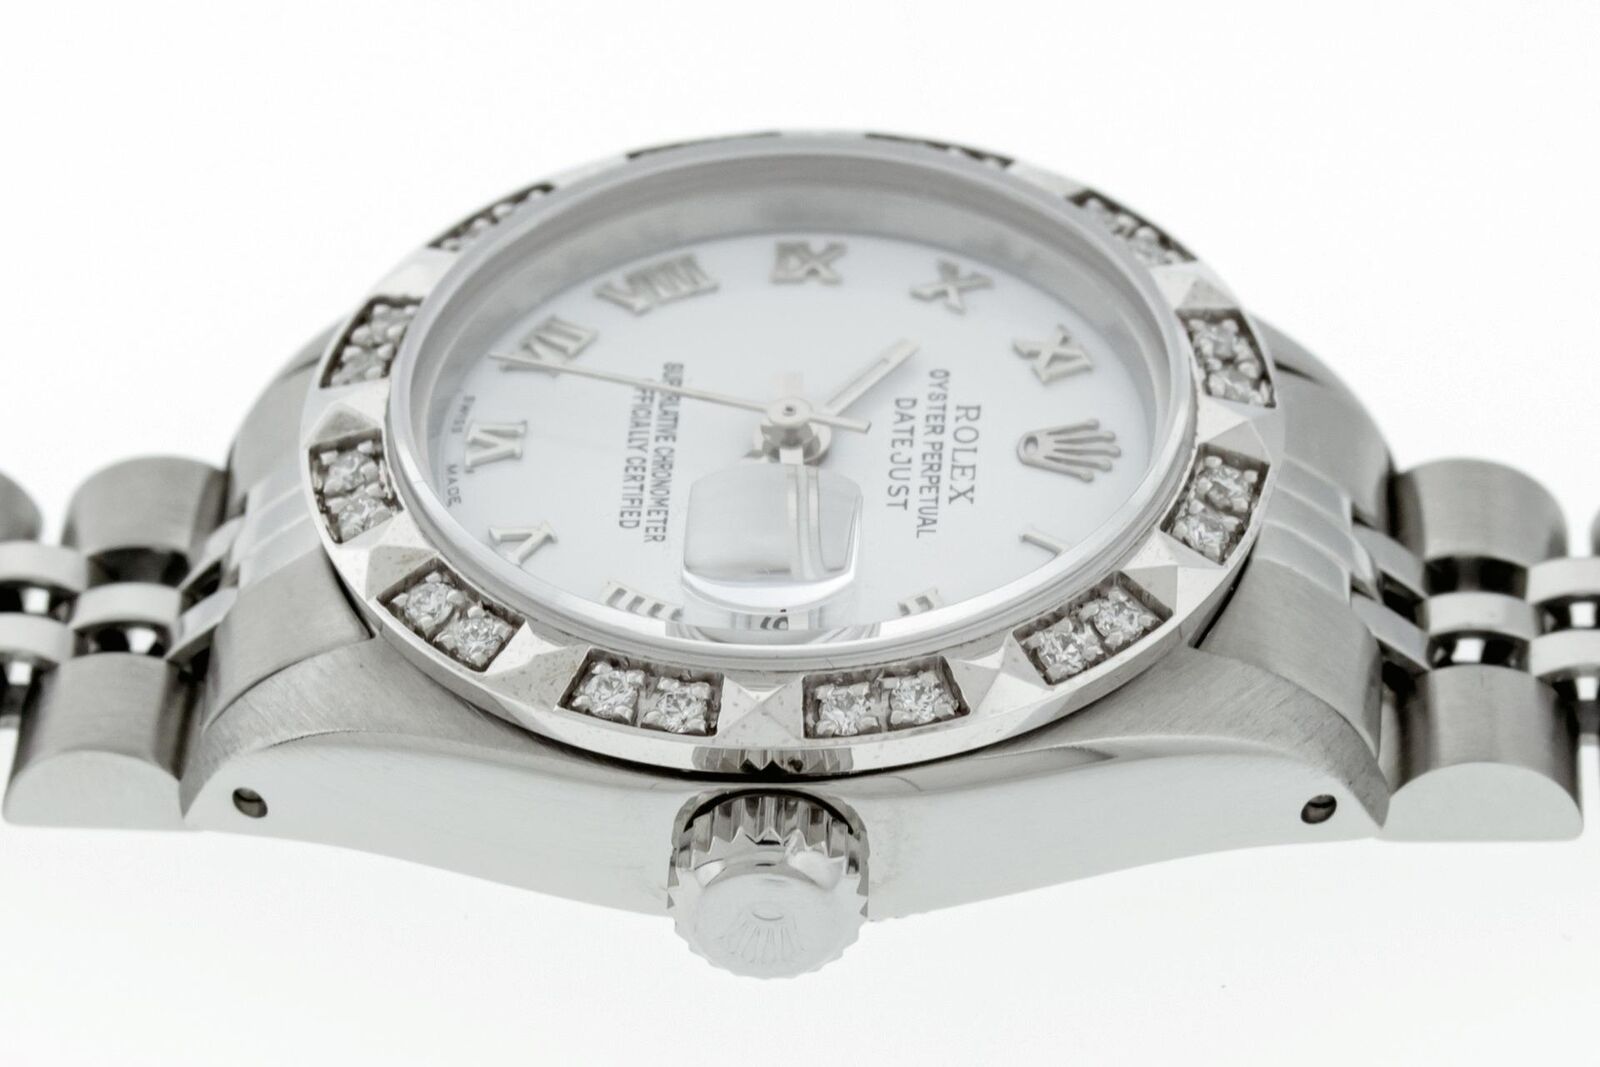 Ladies Rolex Datejust Stainless Steel 18k White Gold White Roman Dial Watch 26mm